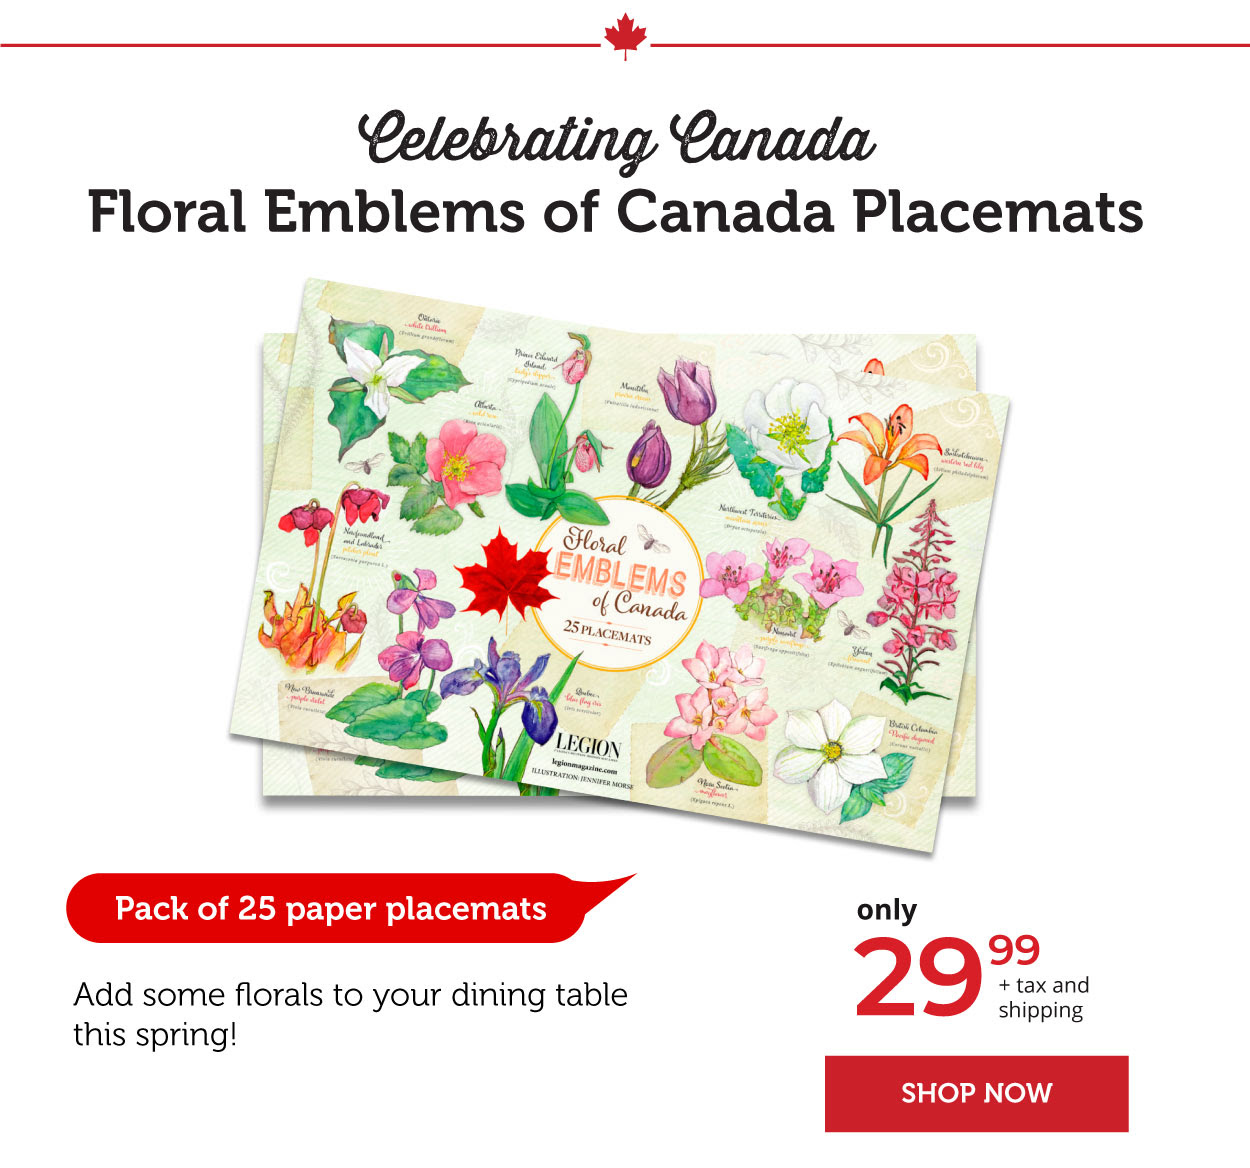 Floral Emblems of Canada Placemats